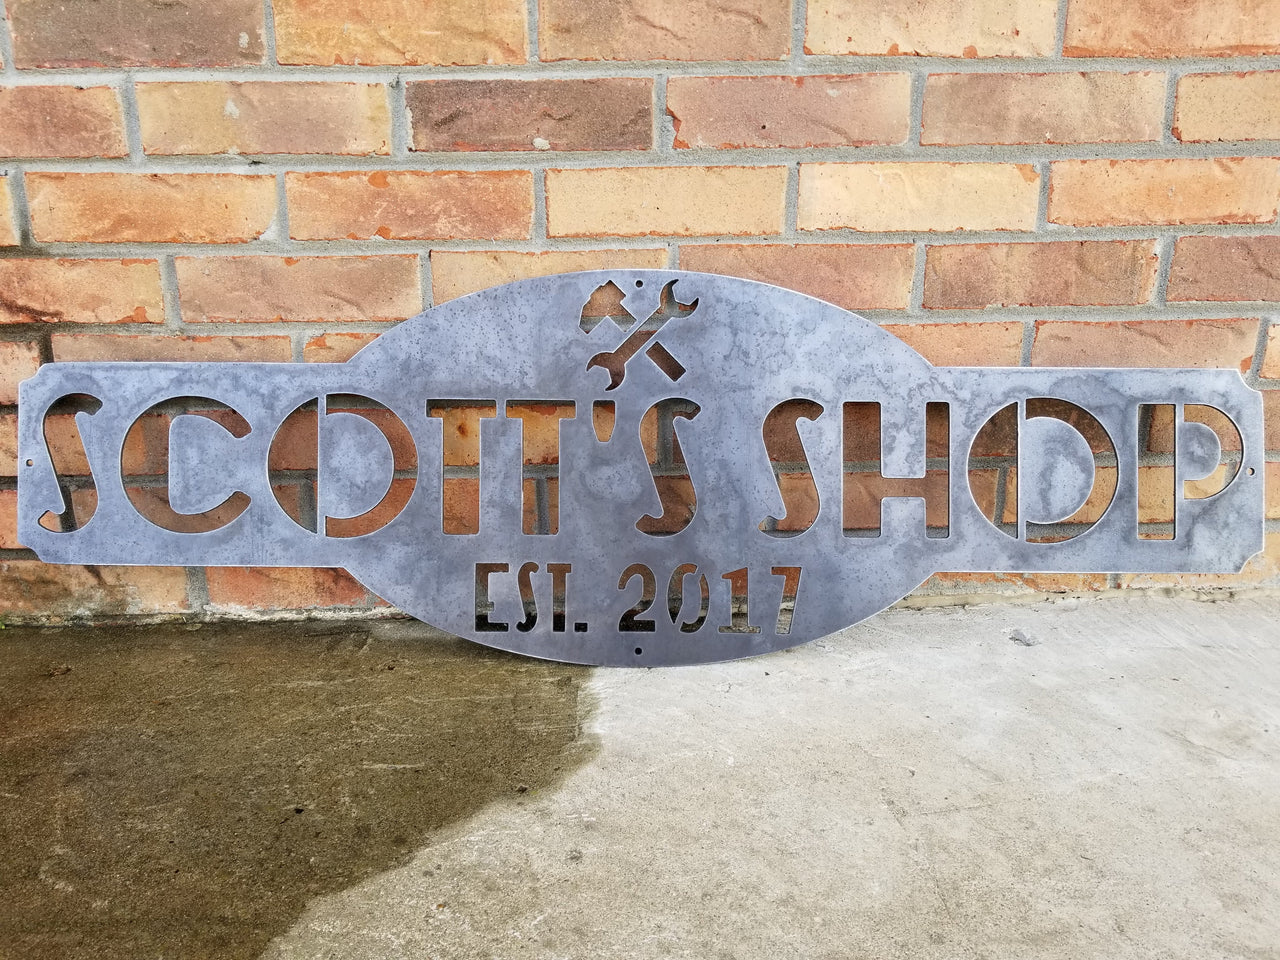 This is a raw steel, custom metal sign.  At the top of the sign is an image of tools. There is two lines of text on this sign which reads, "Scott's Shop, Est. 2013"